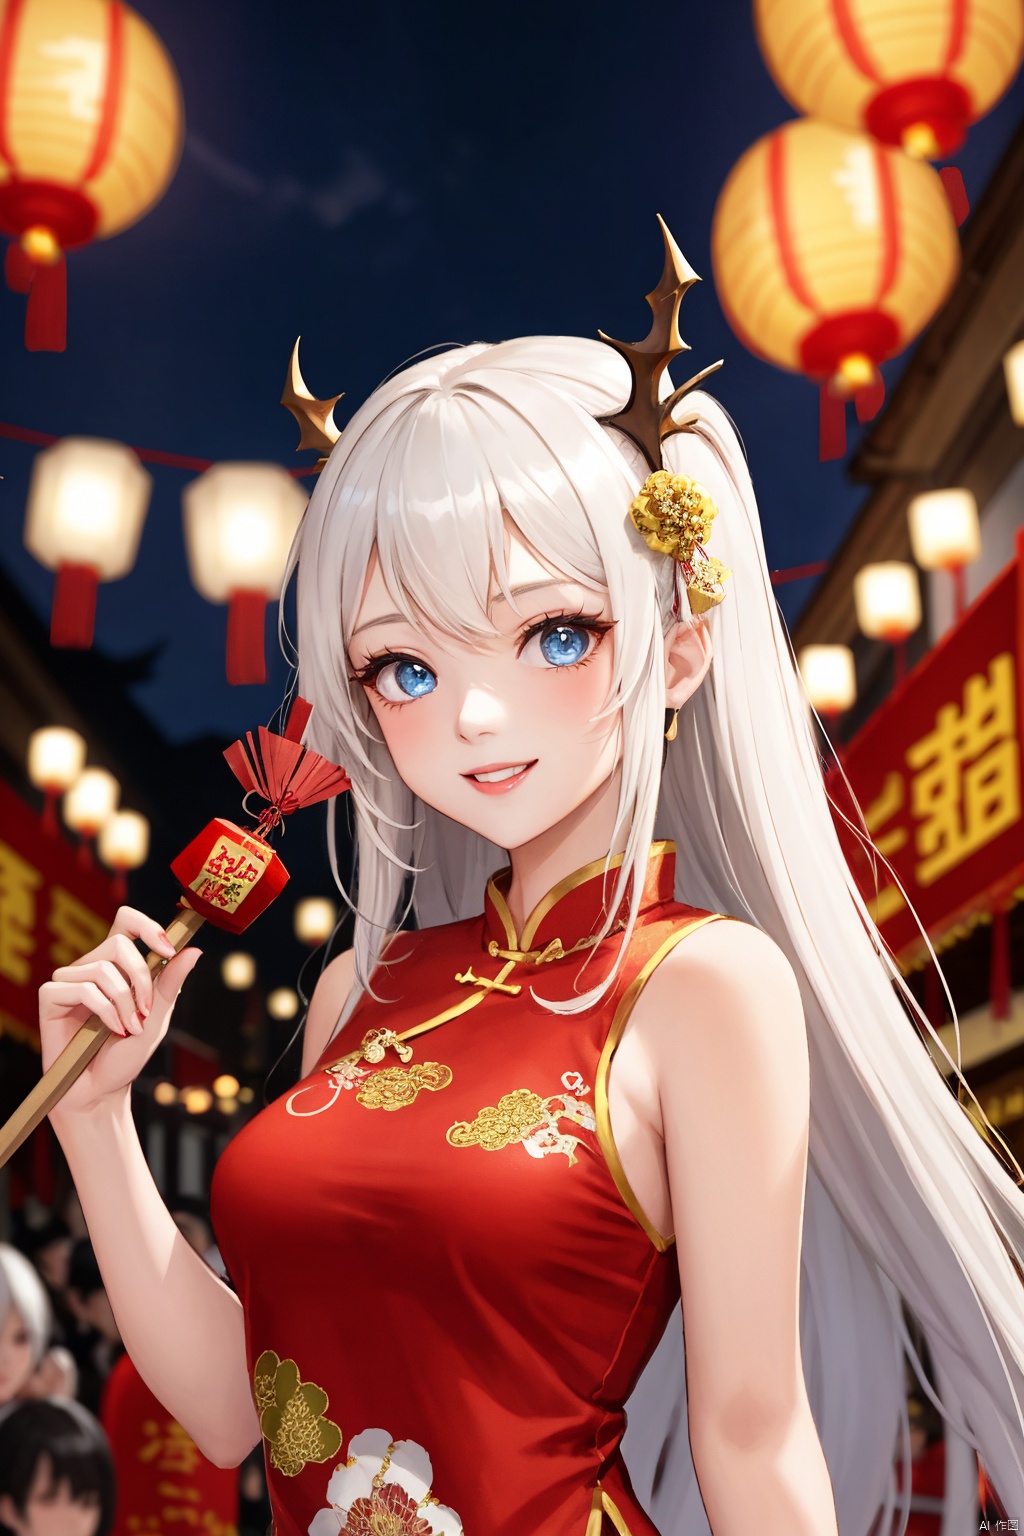  1girl, long hair, bangs, blue eyes, white hair, floating hair,White haired girl, Blue eyes, Chinese New Year, Chinese Dragon (festive, traditional, cultural :1.5), (1 girl :1.2), (Real art :1.2), original, detailed, vibrant colors, Chinese lanterns, fireworks, traditional attire, cheongsam, dragon dance, dynamic pose, smiling, long hair, elegant, celebrating, street parade, red and gold decorations, cuts, (sunset :0.8), urban setting, (crowd in background :0.6), lanterns in hand, (shiny makeup :0.7), almond-shaped eyes, (glowing skin :0.9), (Happy atmosphere :1.4)